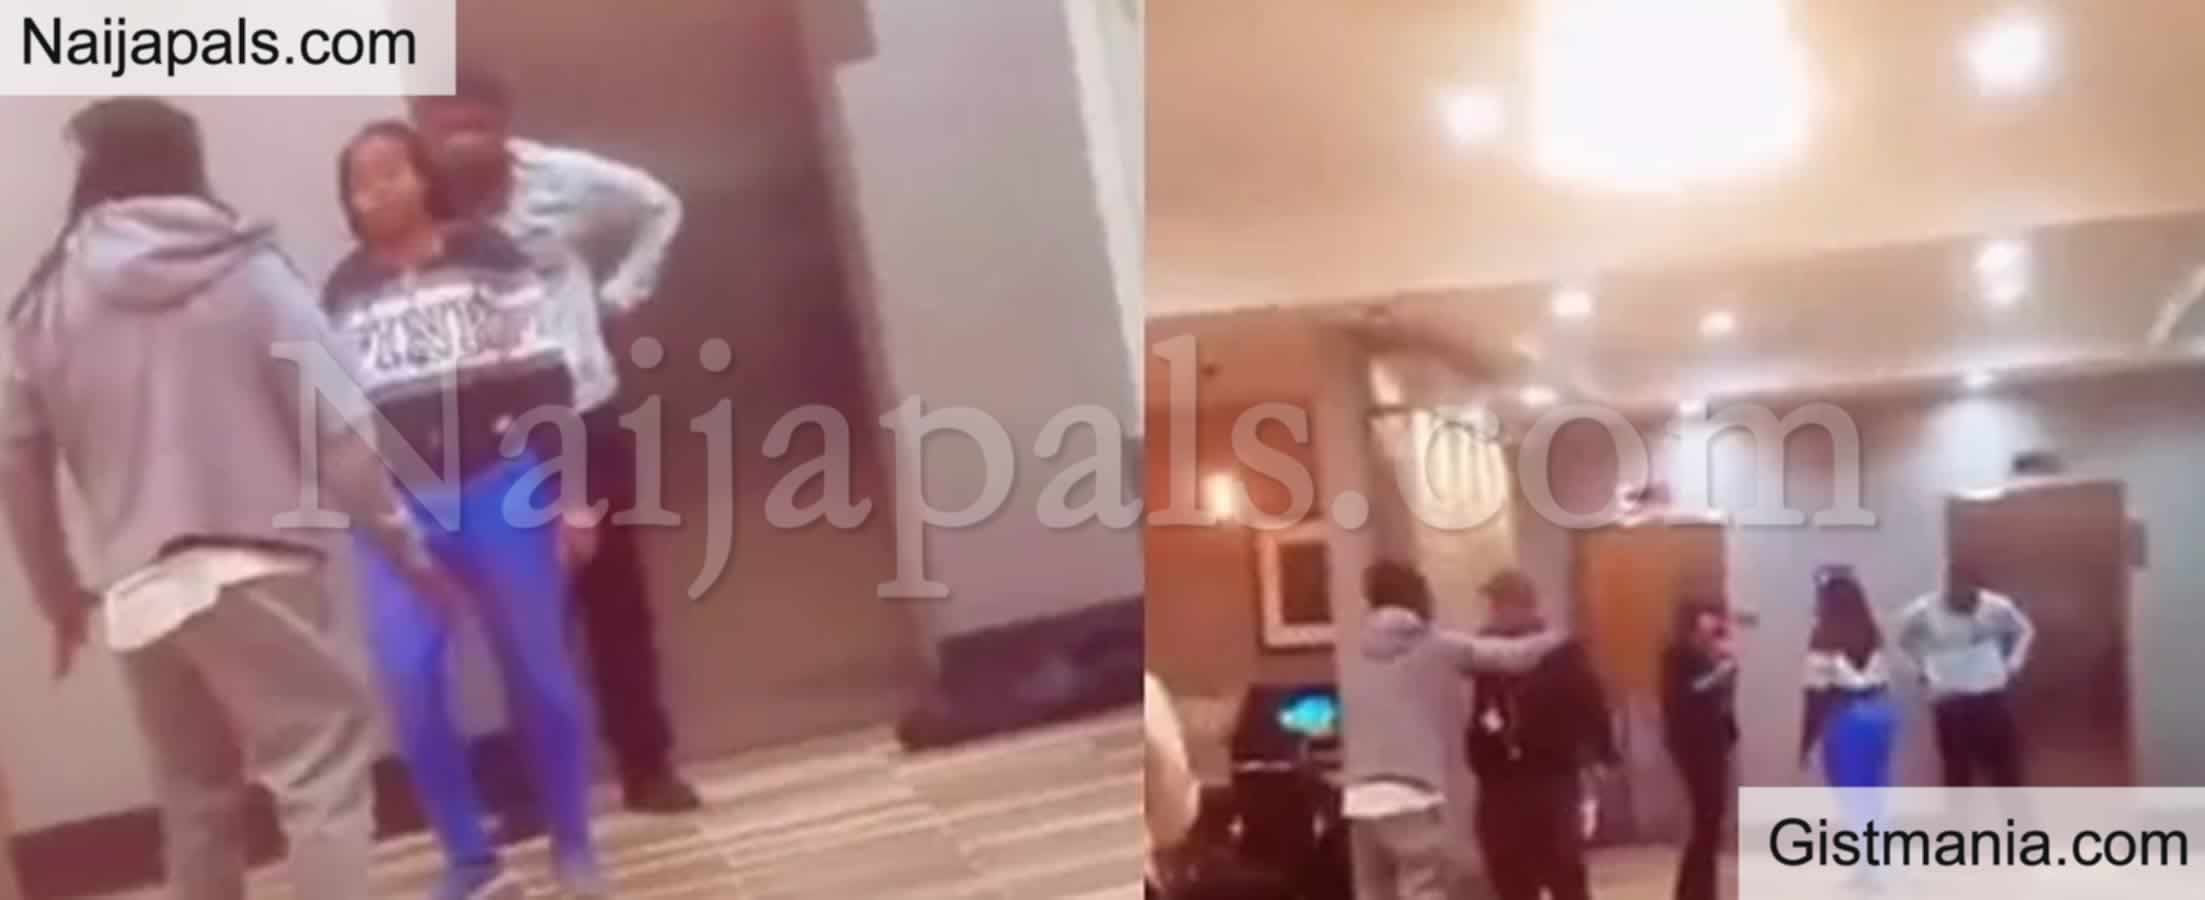 Man Devastated After Catching His Wife At Hotel With Another Man (VIDEO) image